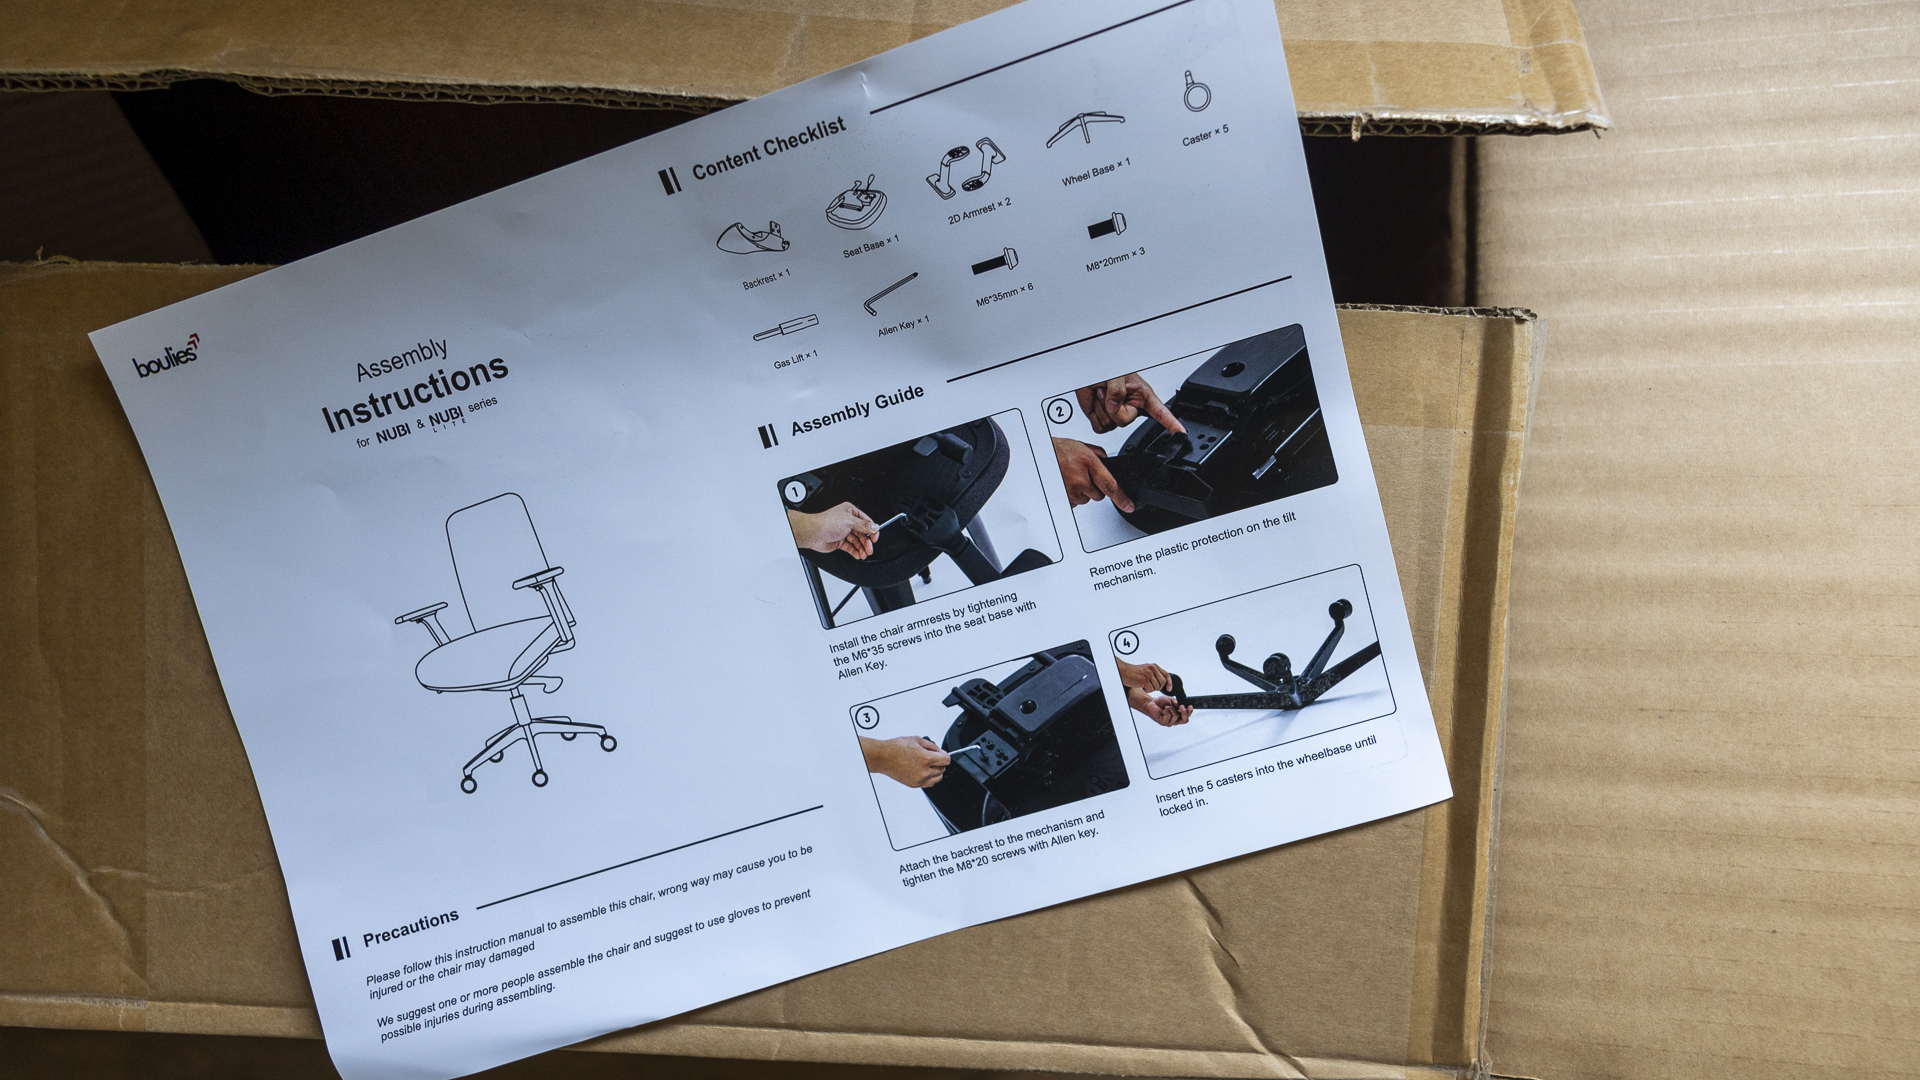 The assembly instructions for the Boulies NUBI chair